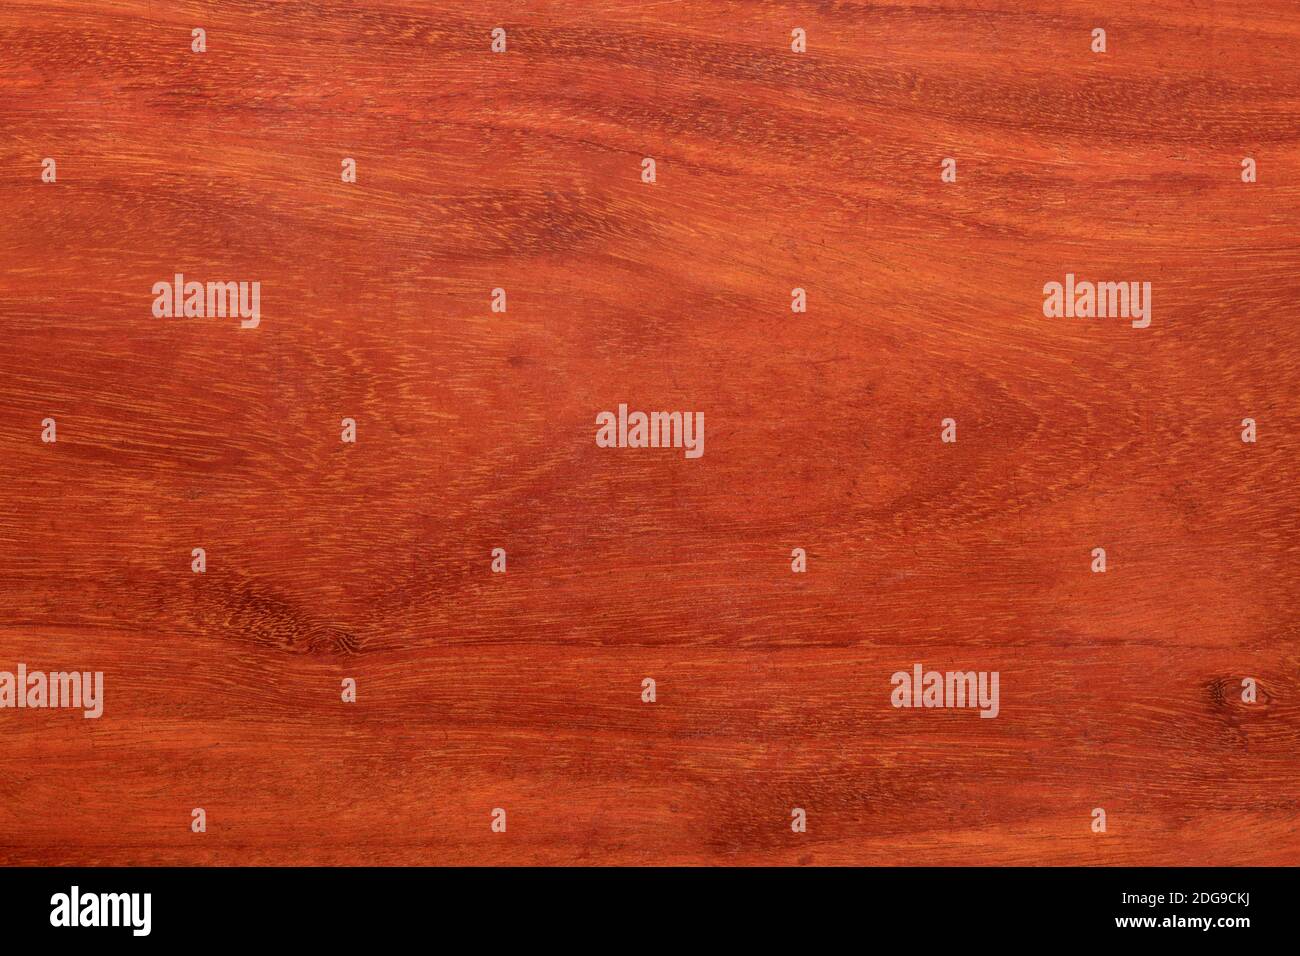 Brown red wooden, old texture background Stock Photo